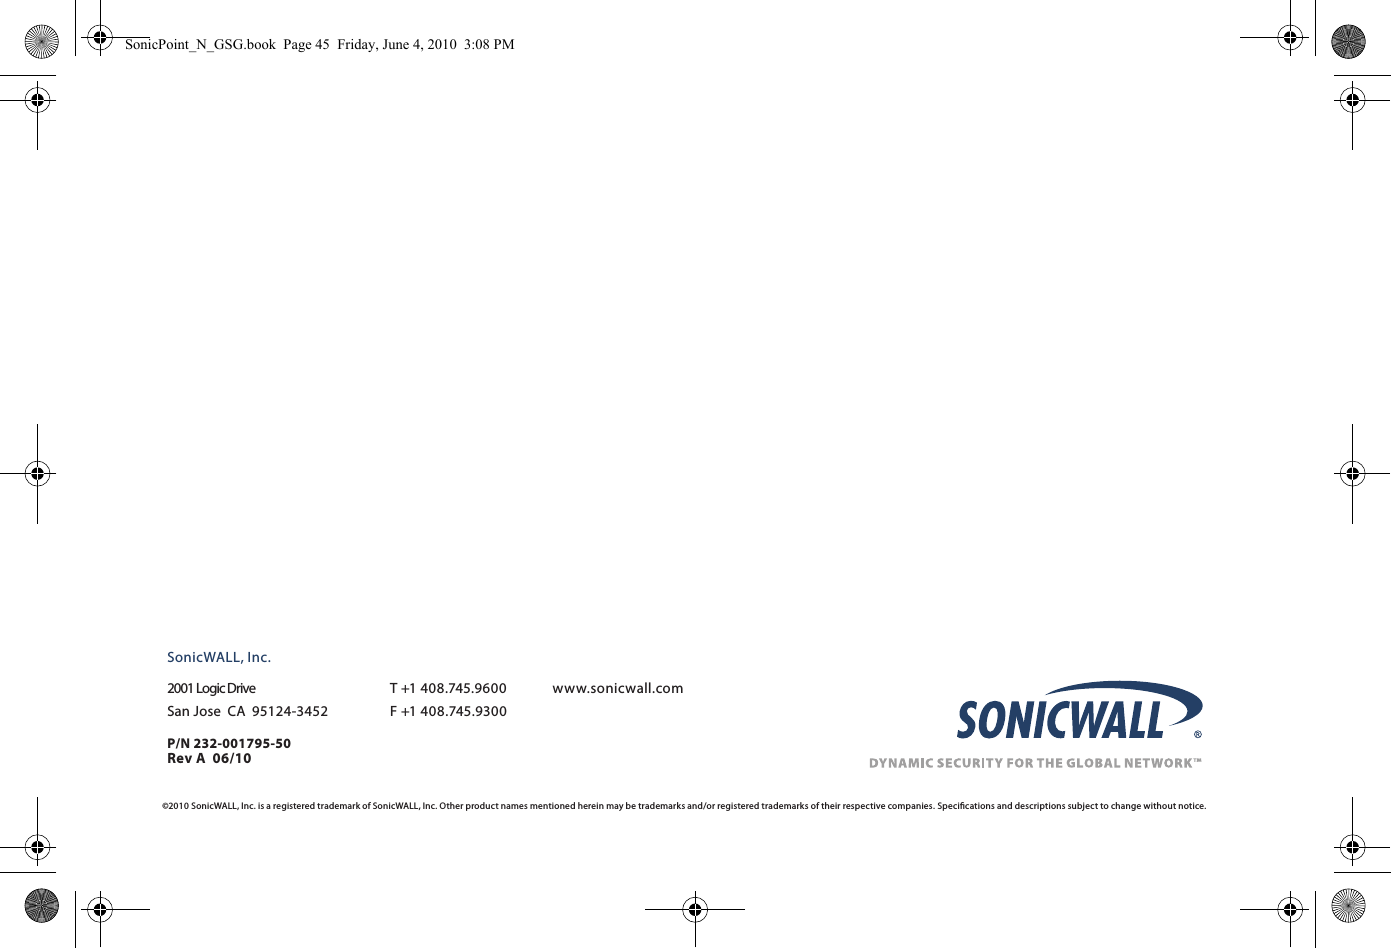 SonicWALL, Inc.2001 Logic Drive   T +1 408.745.9 60 0  w ww. son icwa ll.com   San Jose  CA  95124-3452   F +1 408.745.9300P/N 232-001795-50 Rev A  06/10©2010 SonicWALL, Inc. is a registered trademark of SonicWALL, Inc. Other product names mentioned herein may be trademarks and/or registered trademarks of their respective companies. Speciﬁcations and descriptions subject to change without notice. SonicPoint_N_GSG.book  Page 45  Friday, June 4, 2010  3:08 PM